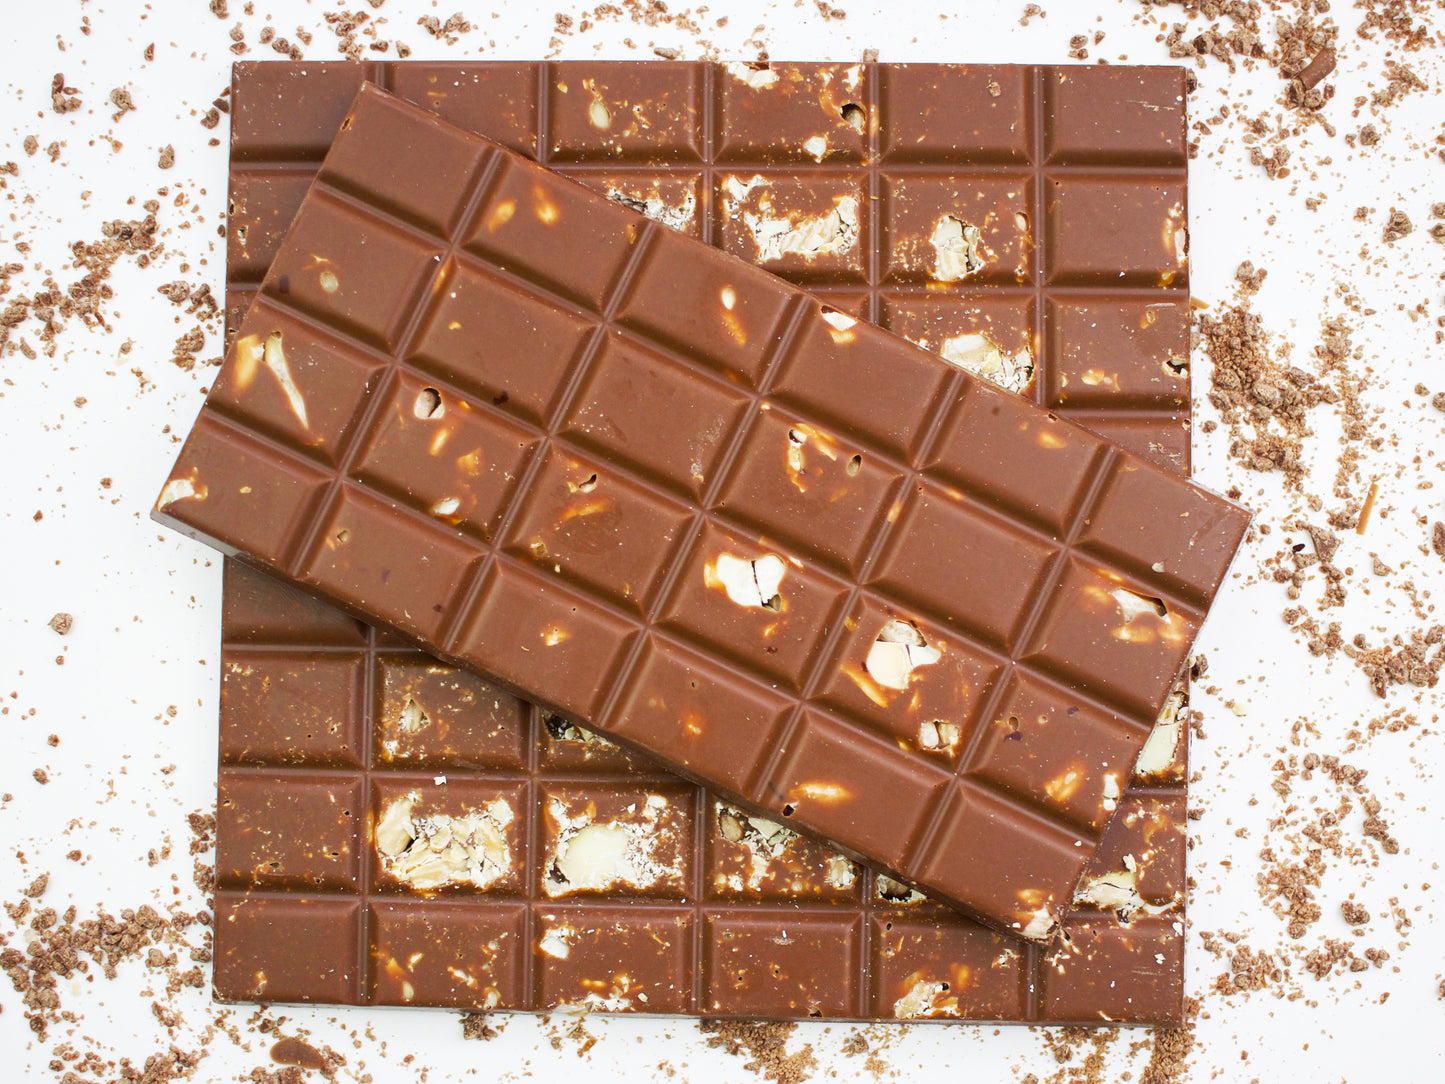 Image shows 3, 100g hand made milk chocolate bars embedded with toasted almonds.